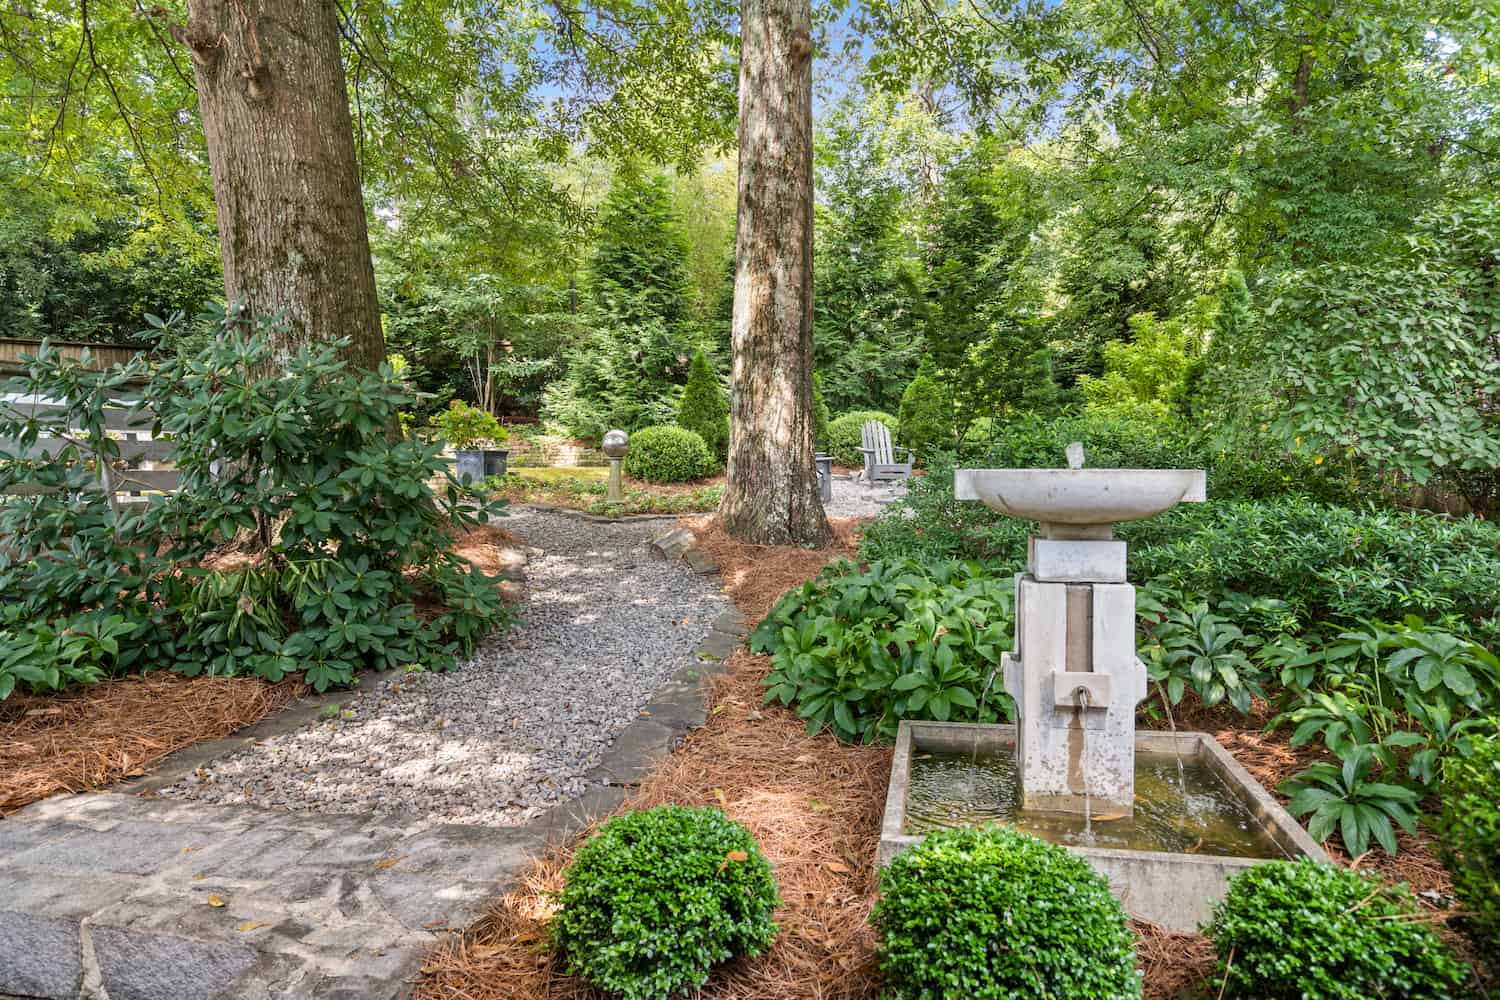 Tranquil fountain - Atlanta home improvements that add value